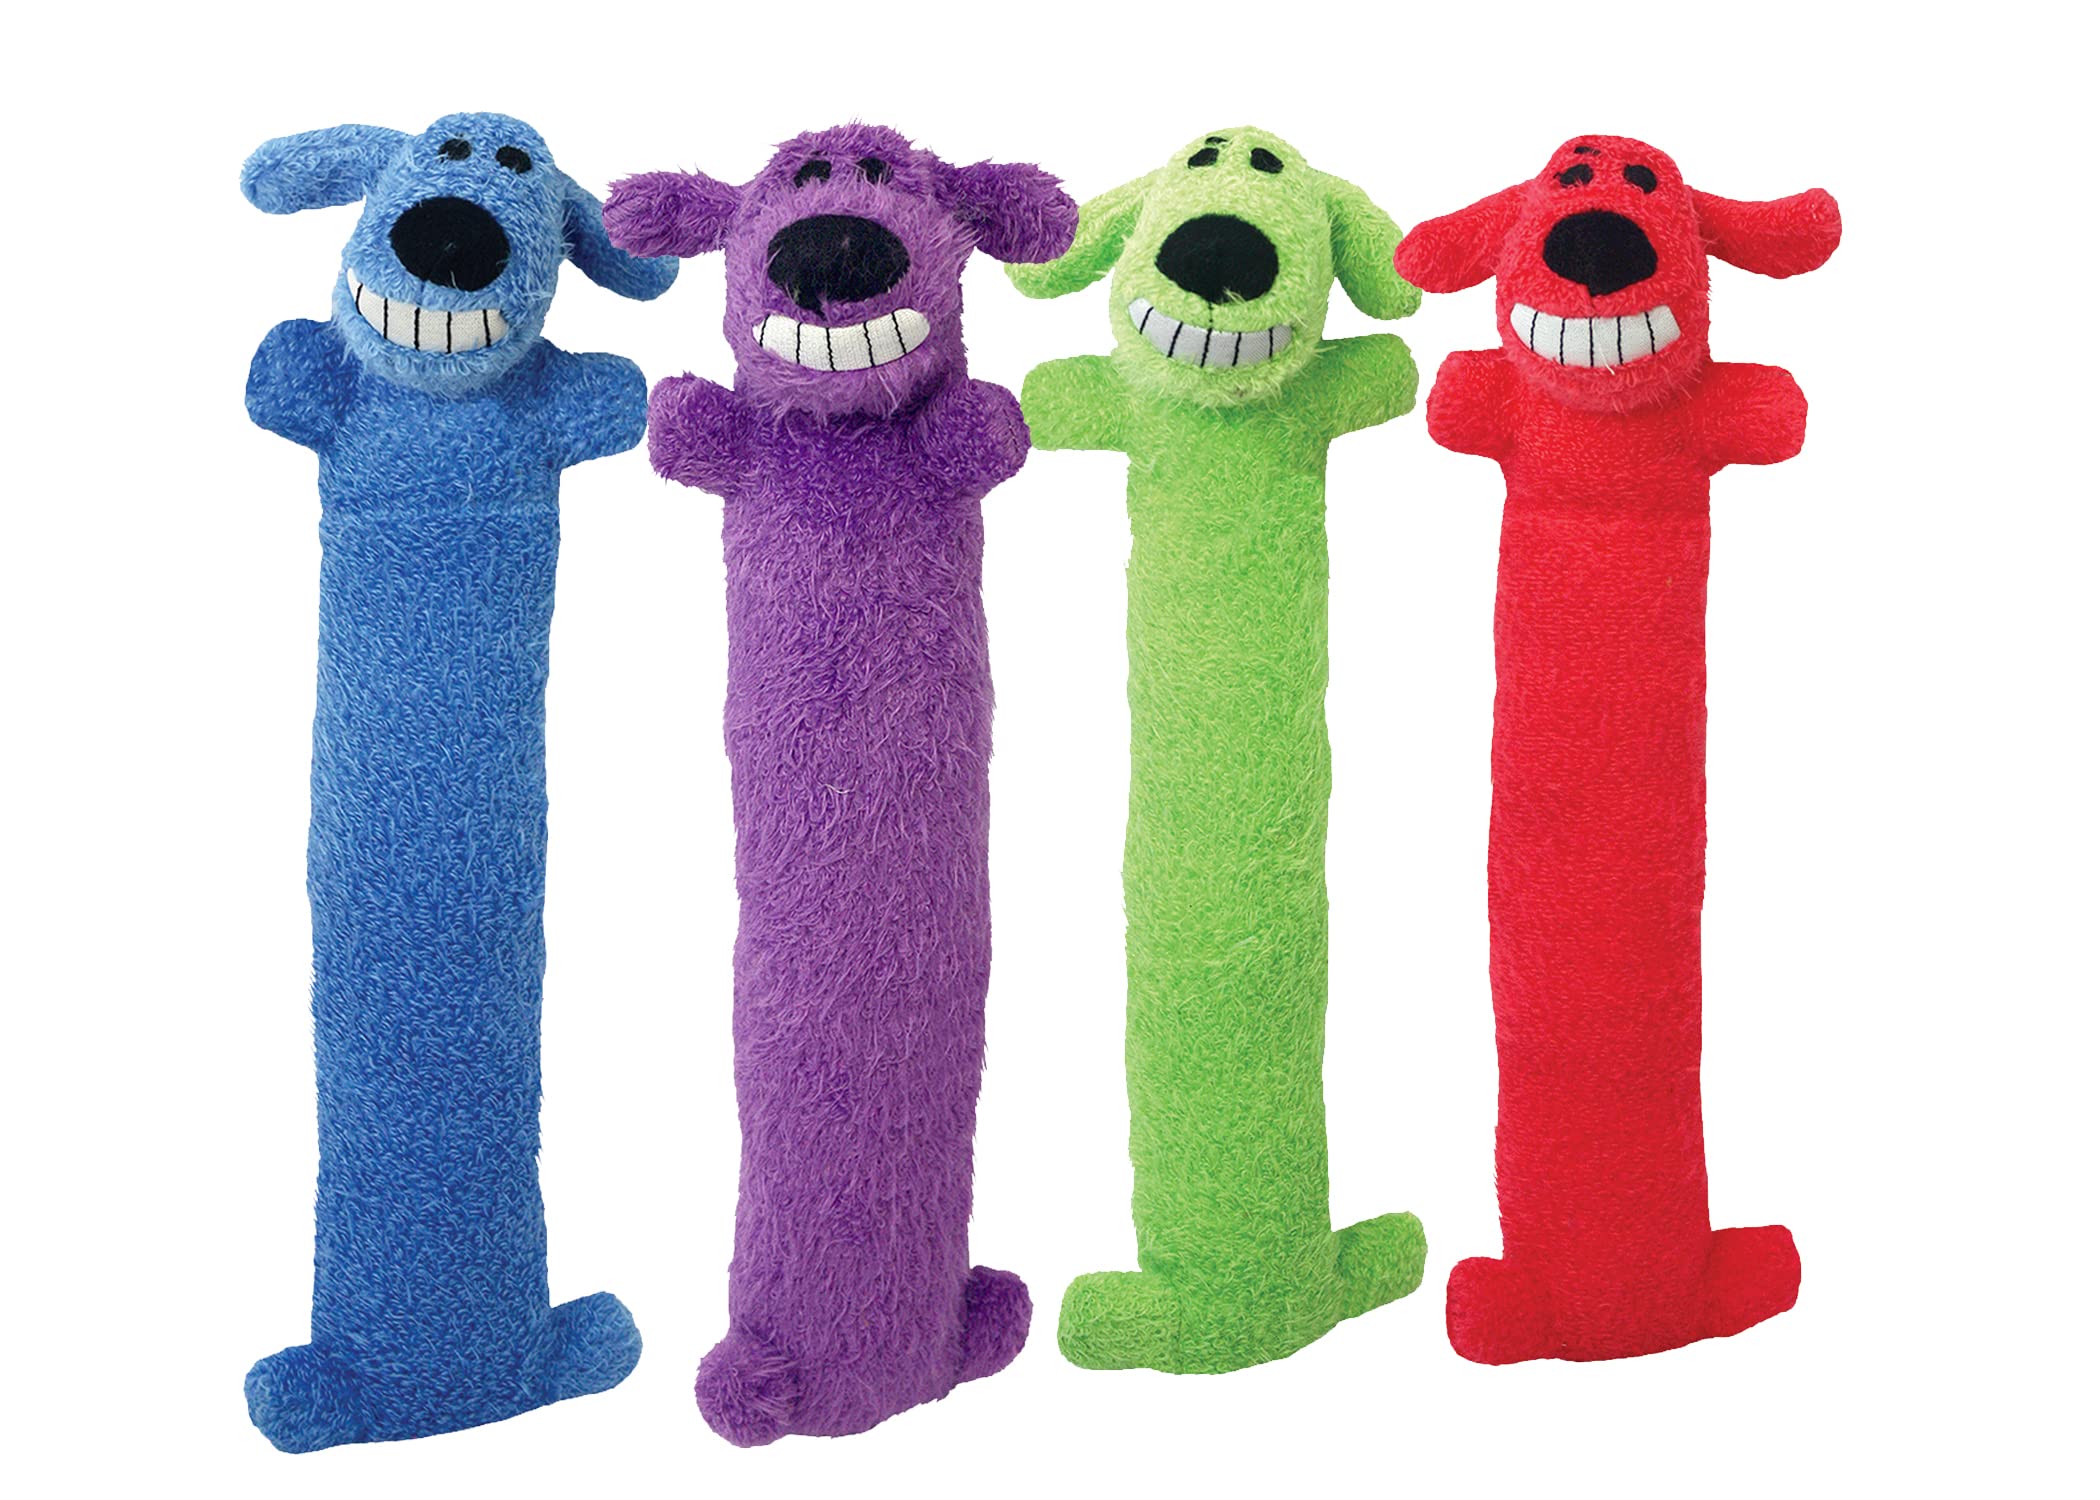 Multipet Loofa Dog 18" Plush Dog Toy, Colors May Vary (1 each) $3.28 + Free Shipping w/ Prime or on $35+